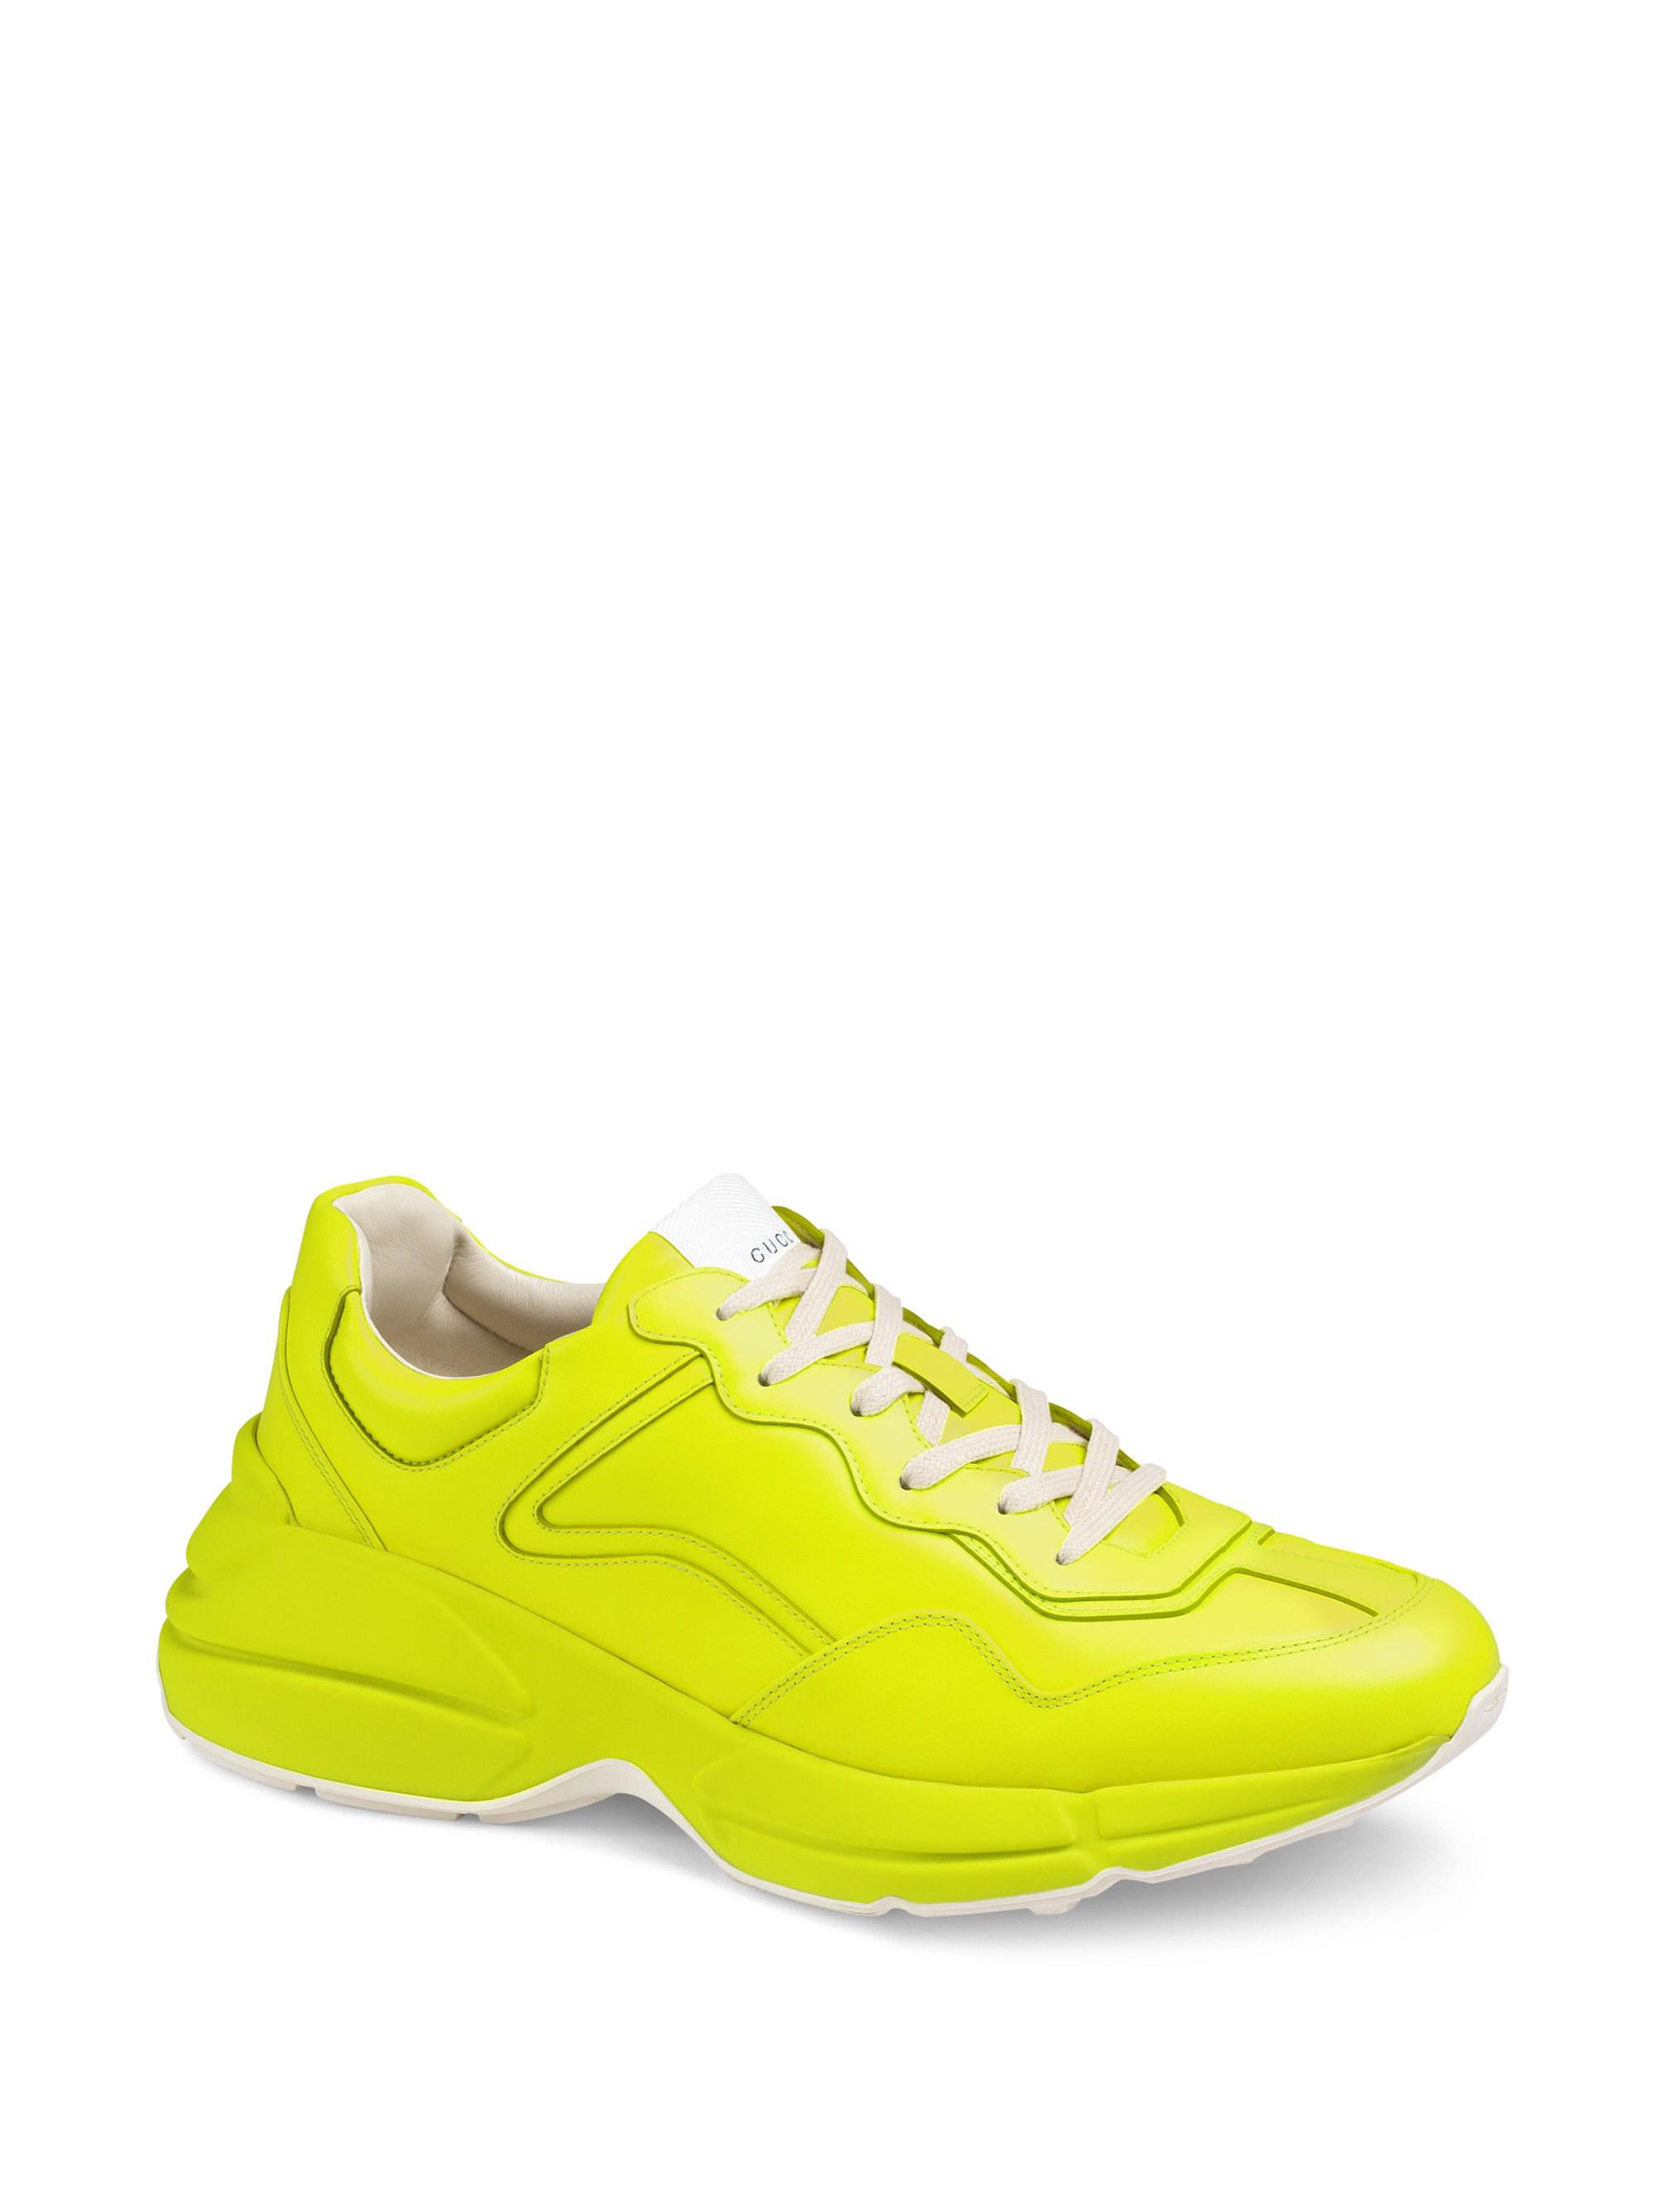 Gucci Rhyton Fluorescent Leather Sneaker in Yellow for Men - Lyst